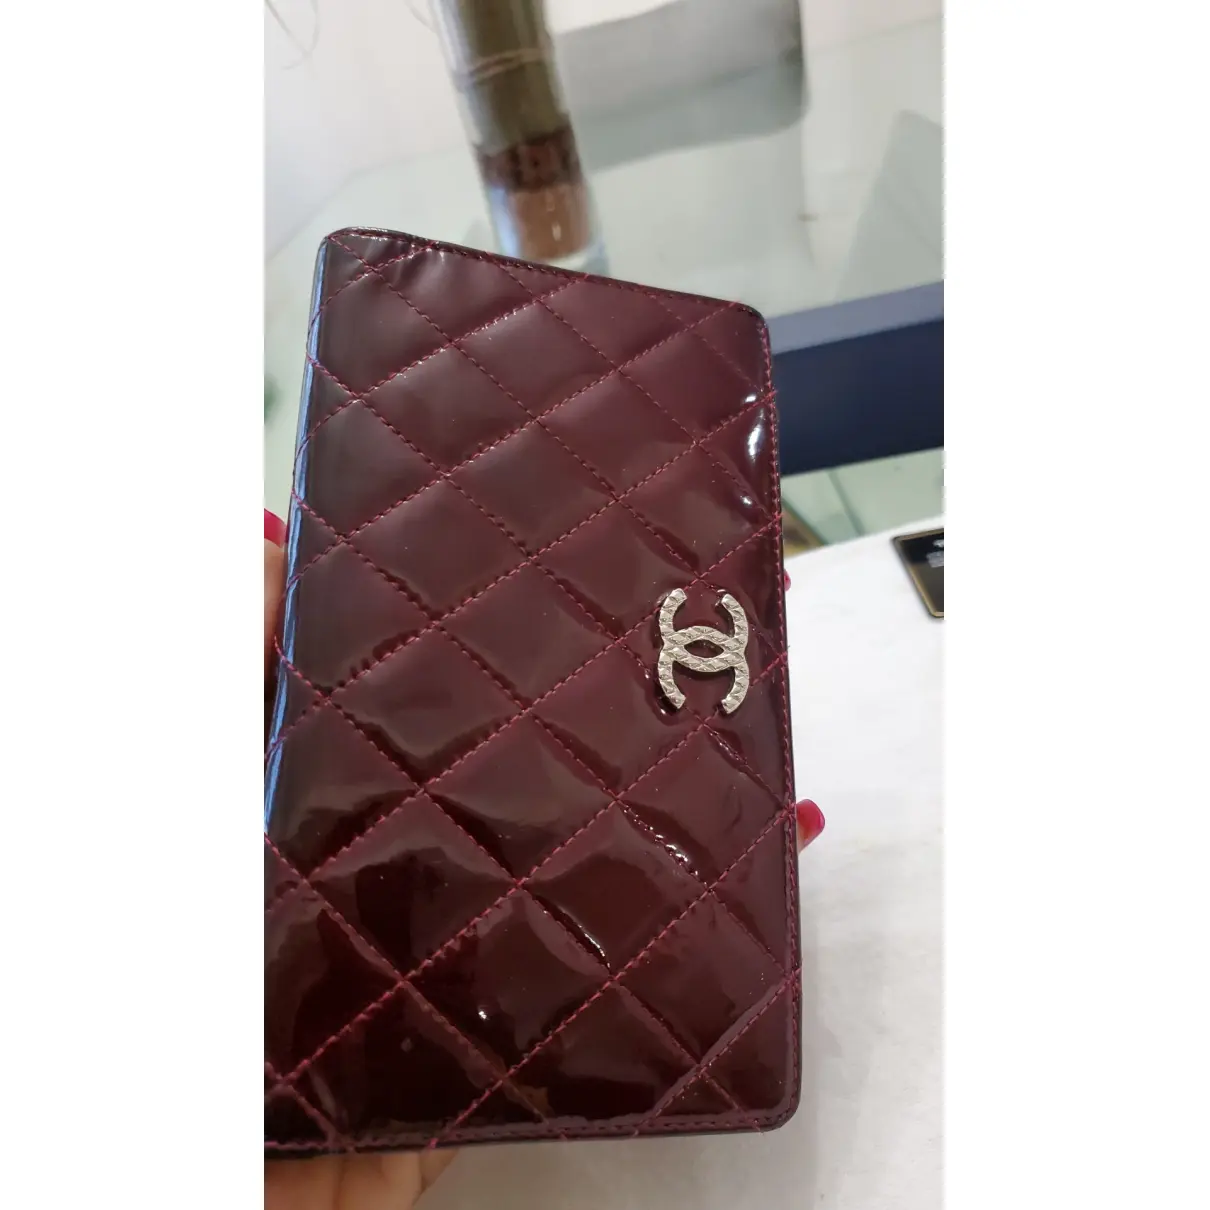 Buy Chanel Patent leather wallet online